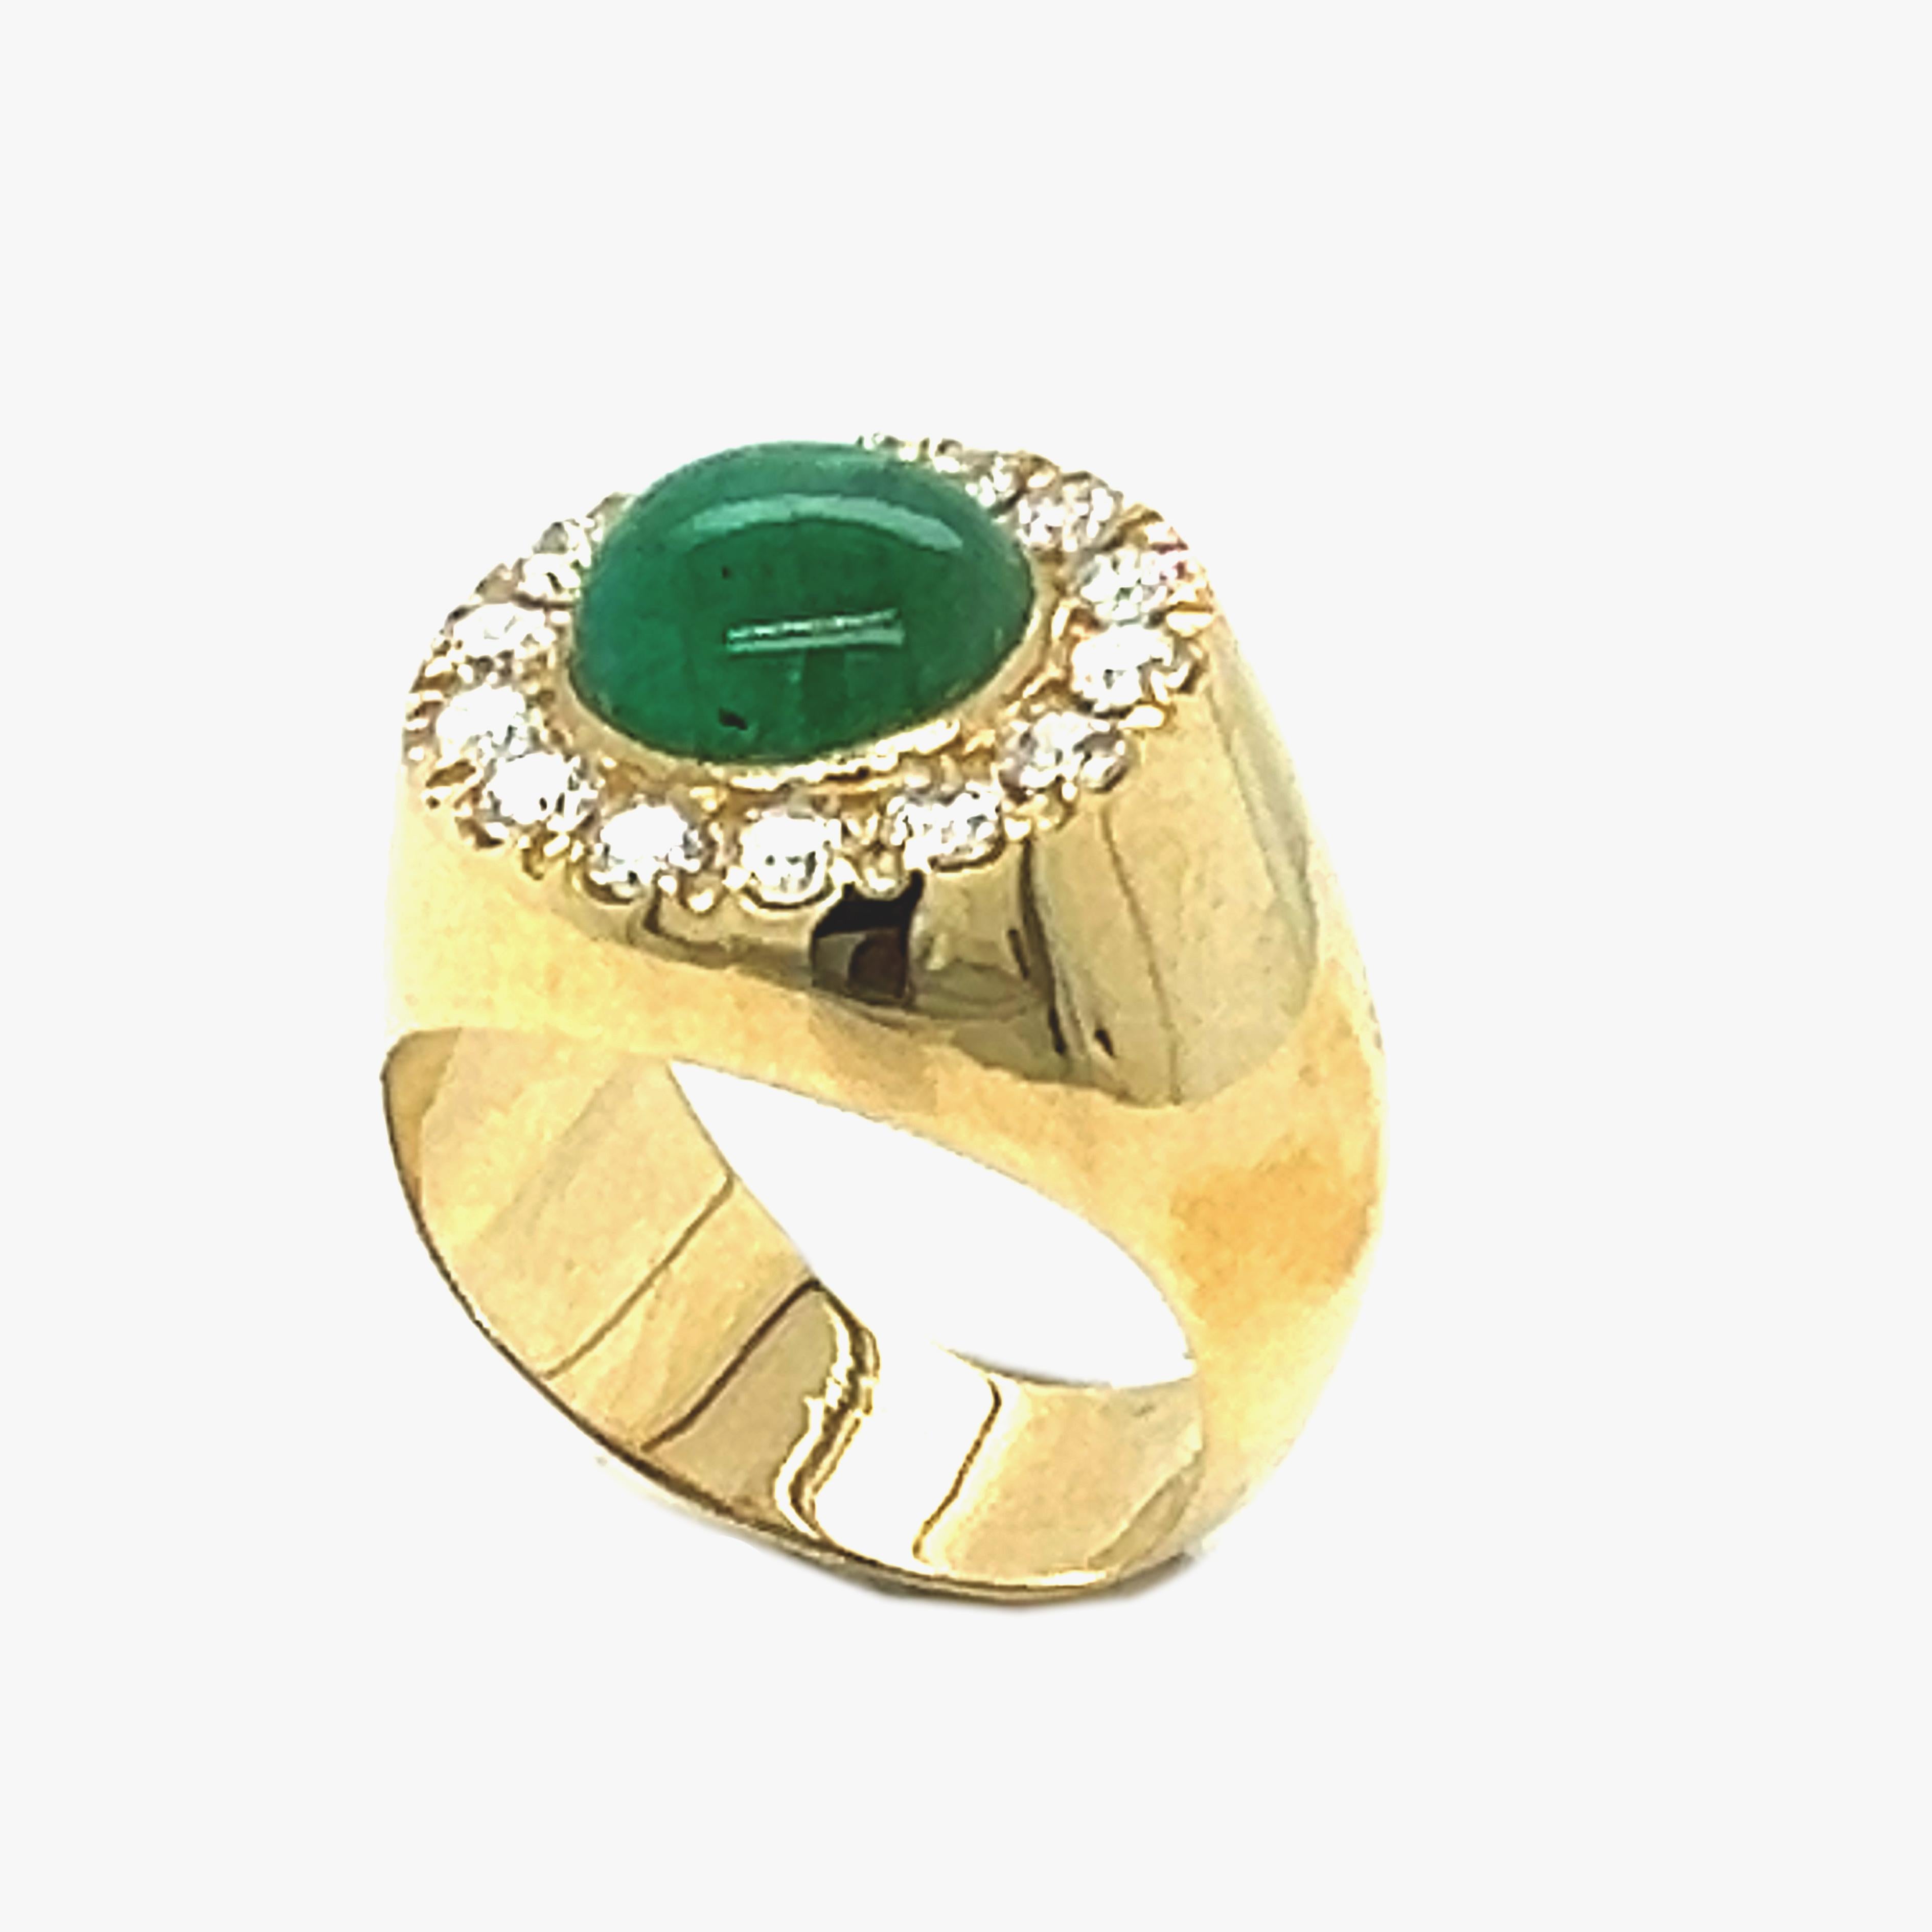 Chic, Unique yet Timeless Contemporary Cocktail Ring featuring a 2.09Kt Natural Emerald Round Cabochon surrounded by 0.89Kt Top Quality White Diamond in an elegant Yellow Gold Setting, perfect as a cocktail ring as well as a pinkie: a Stunning,